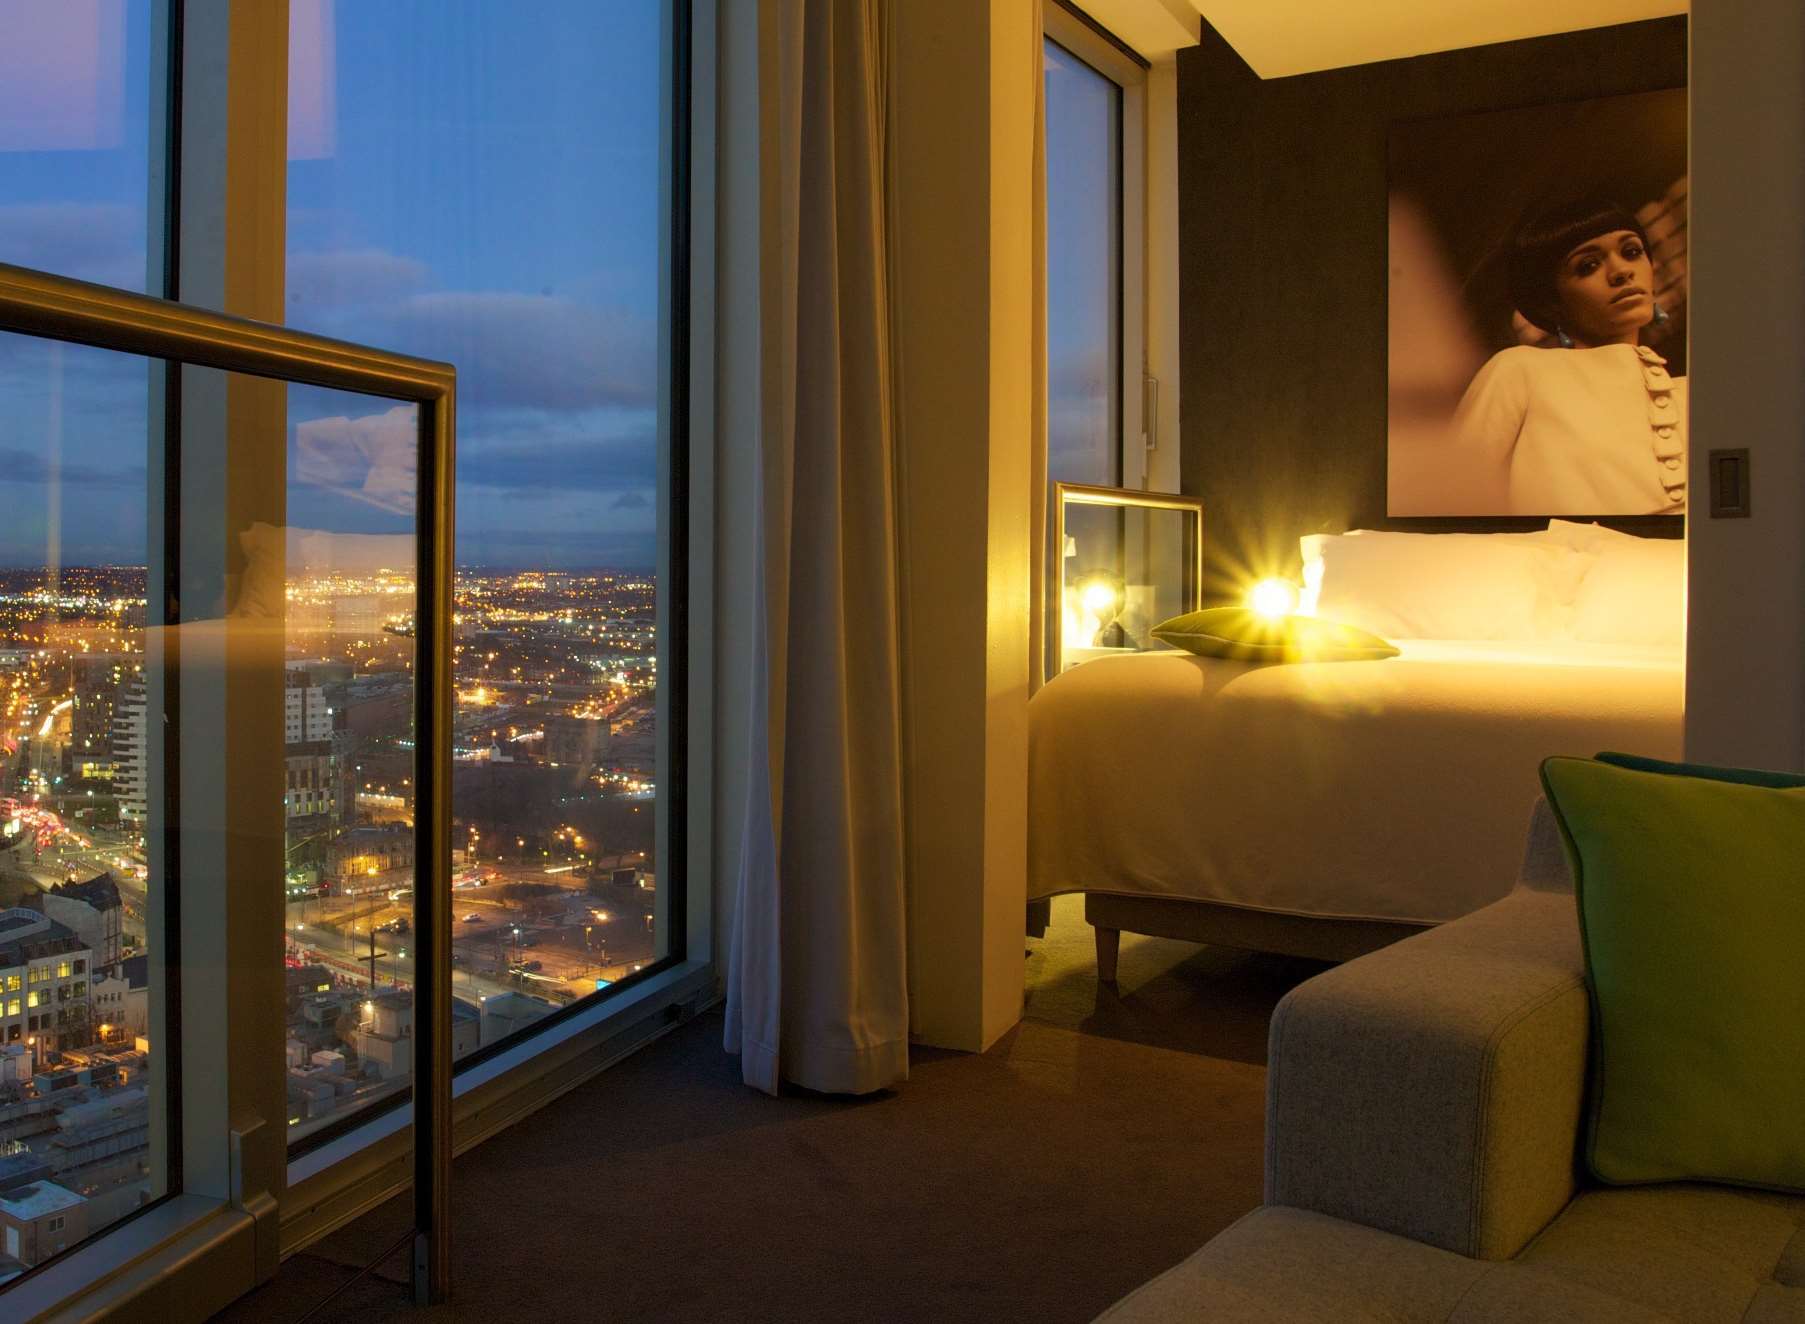 The Staying Cool apartments are stylishly decorated and offer great views across Birmingham